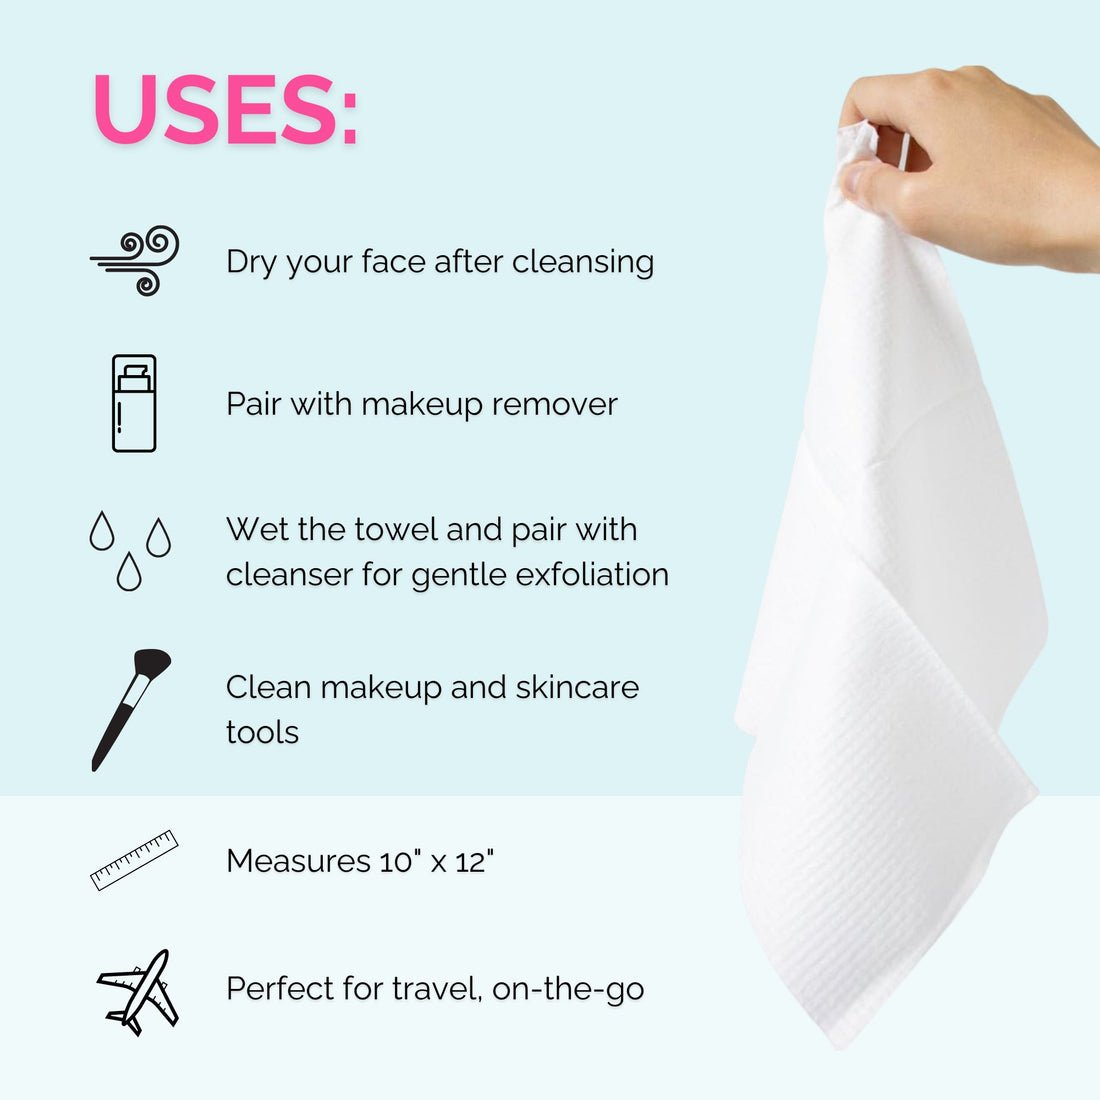 Thank Me Later Clean Face Towels